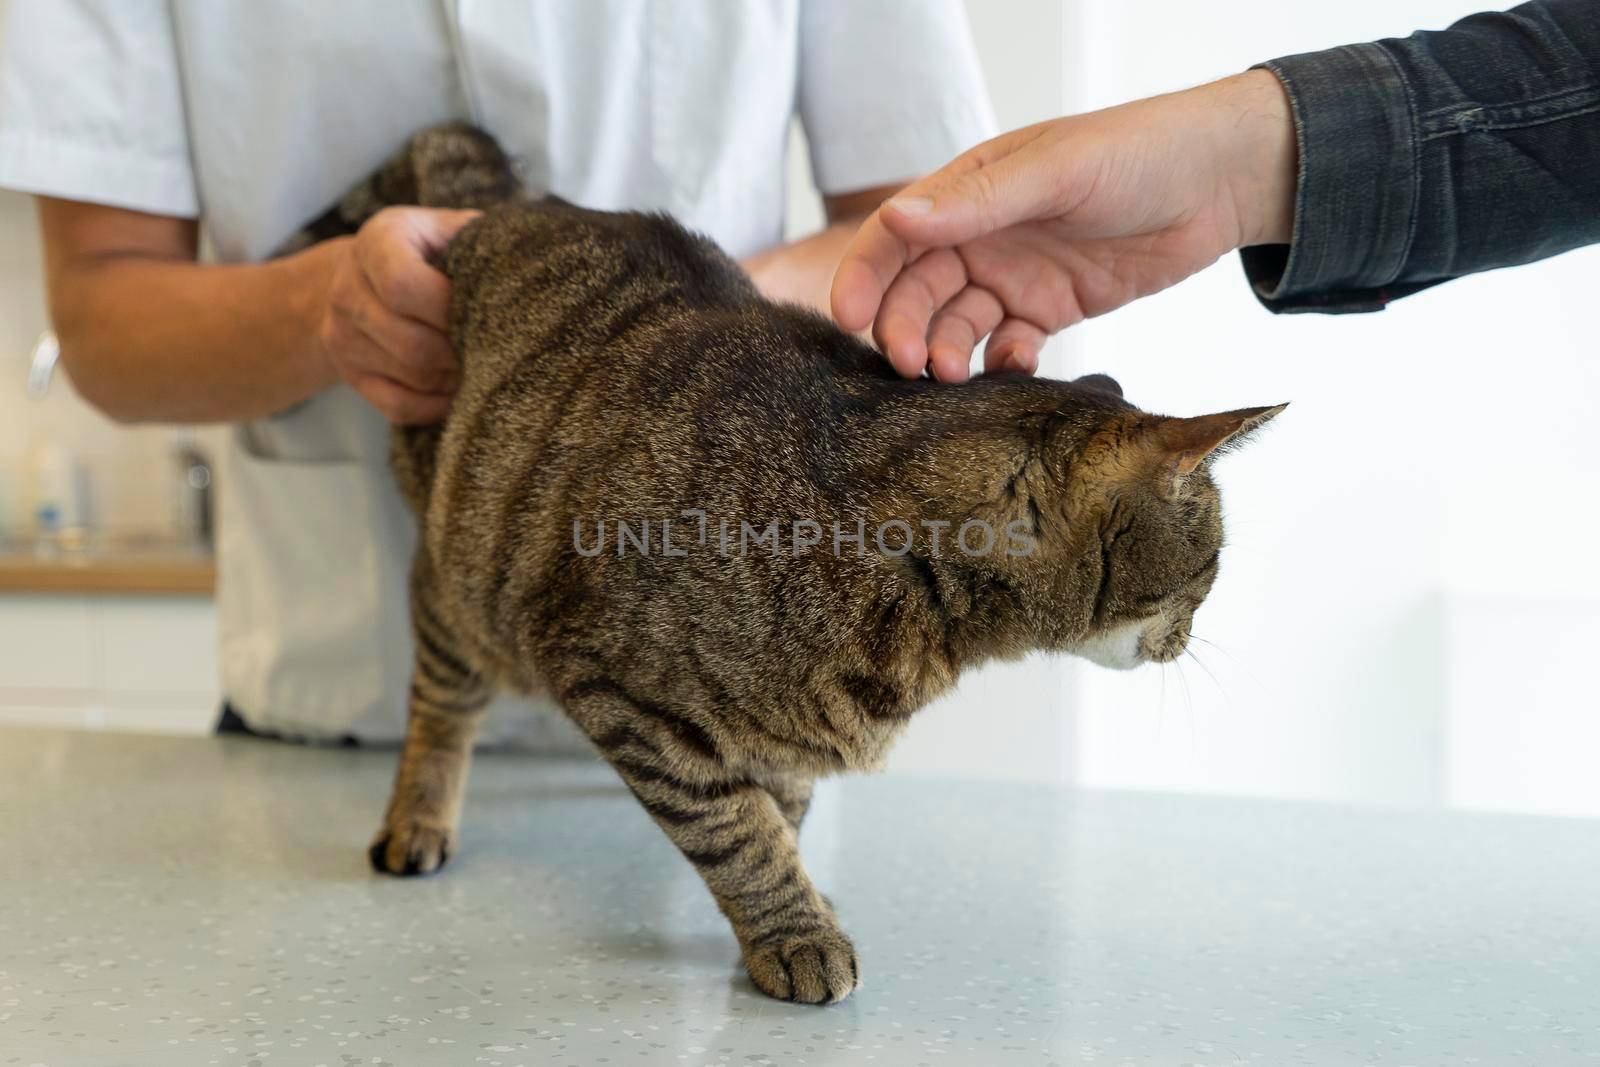 Tabby cat being examinated at his intestines and back by an unrecognizable veterinarian, his owner caressing him by LeoniekvanderVliet